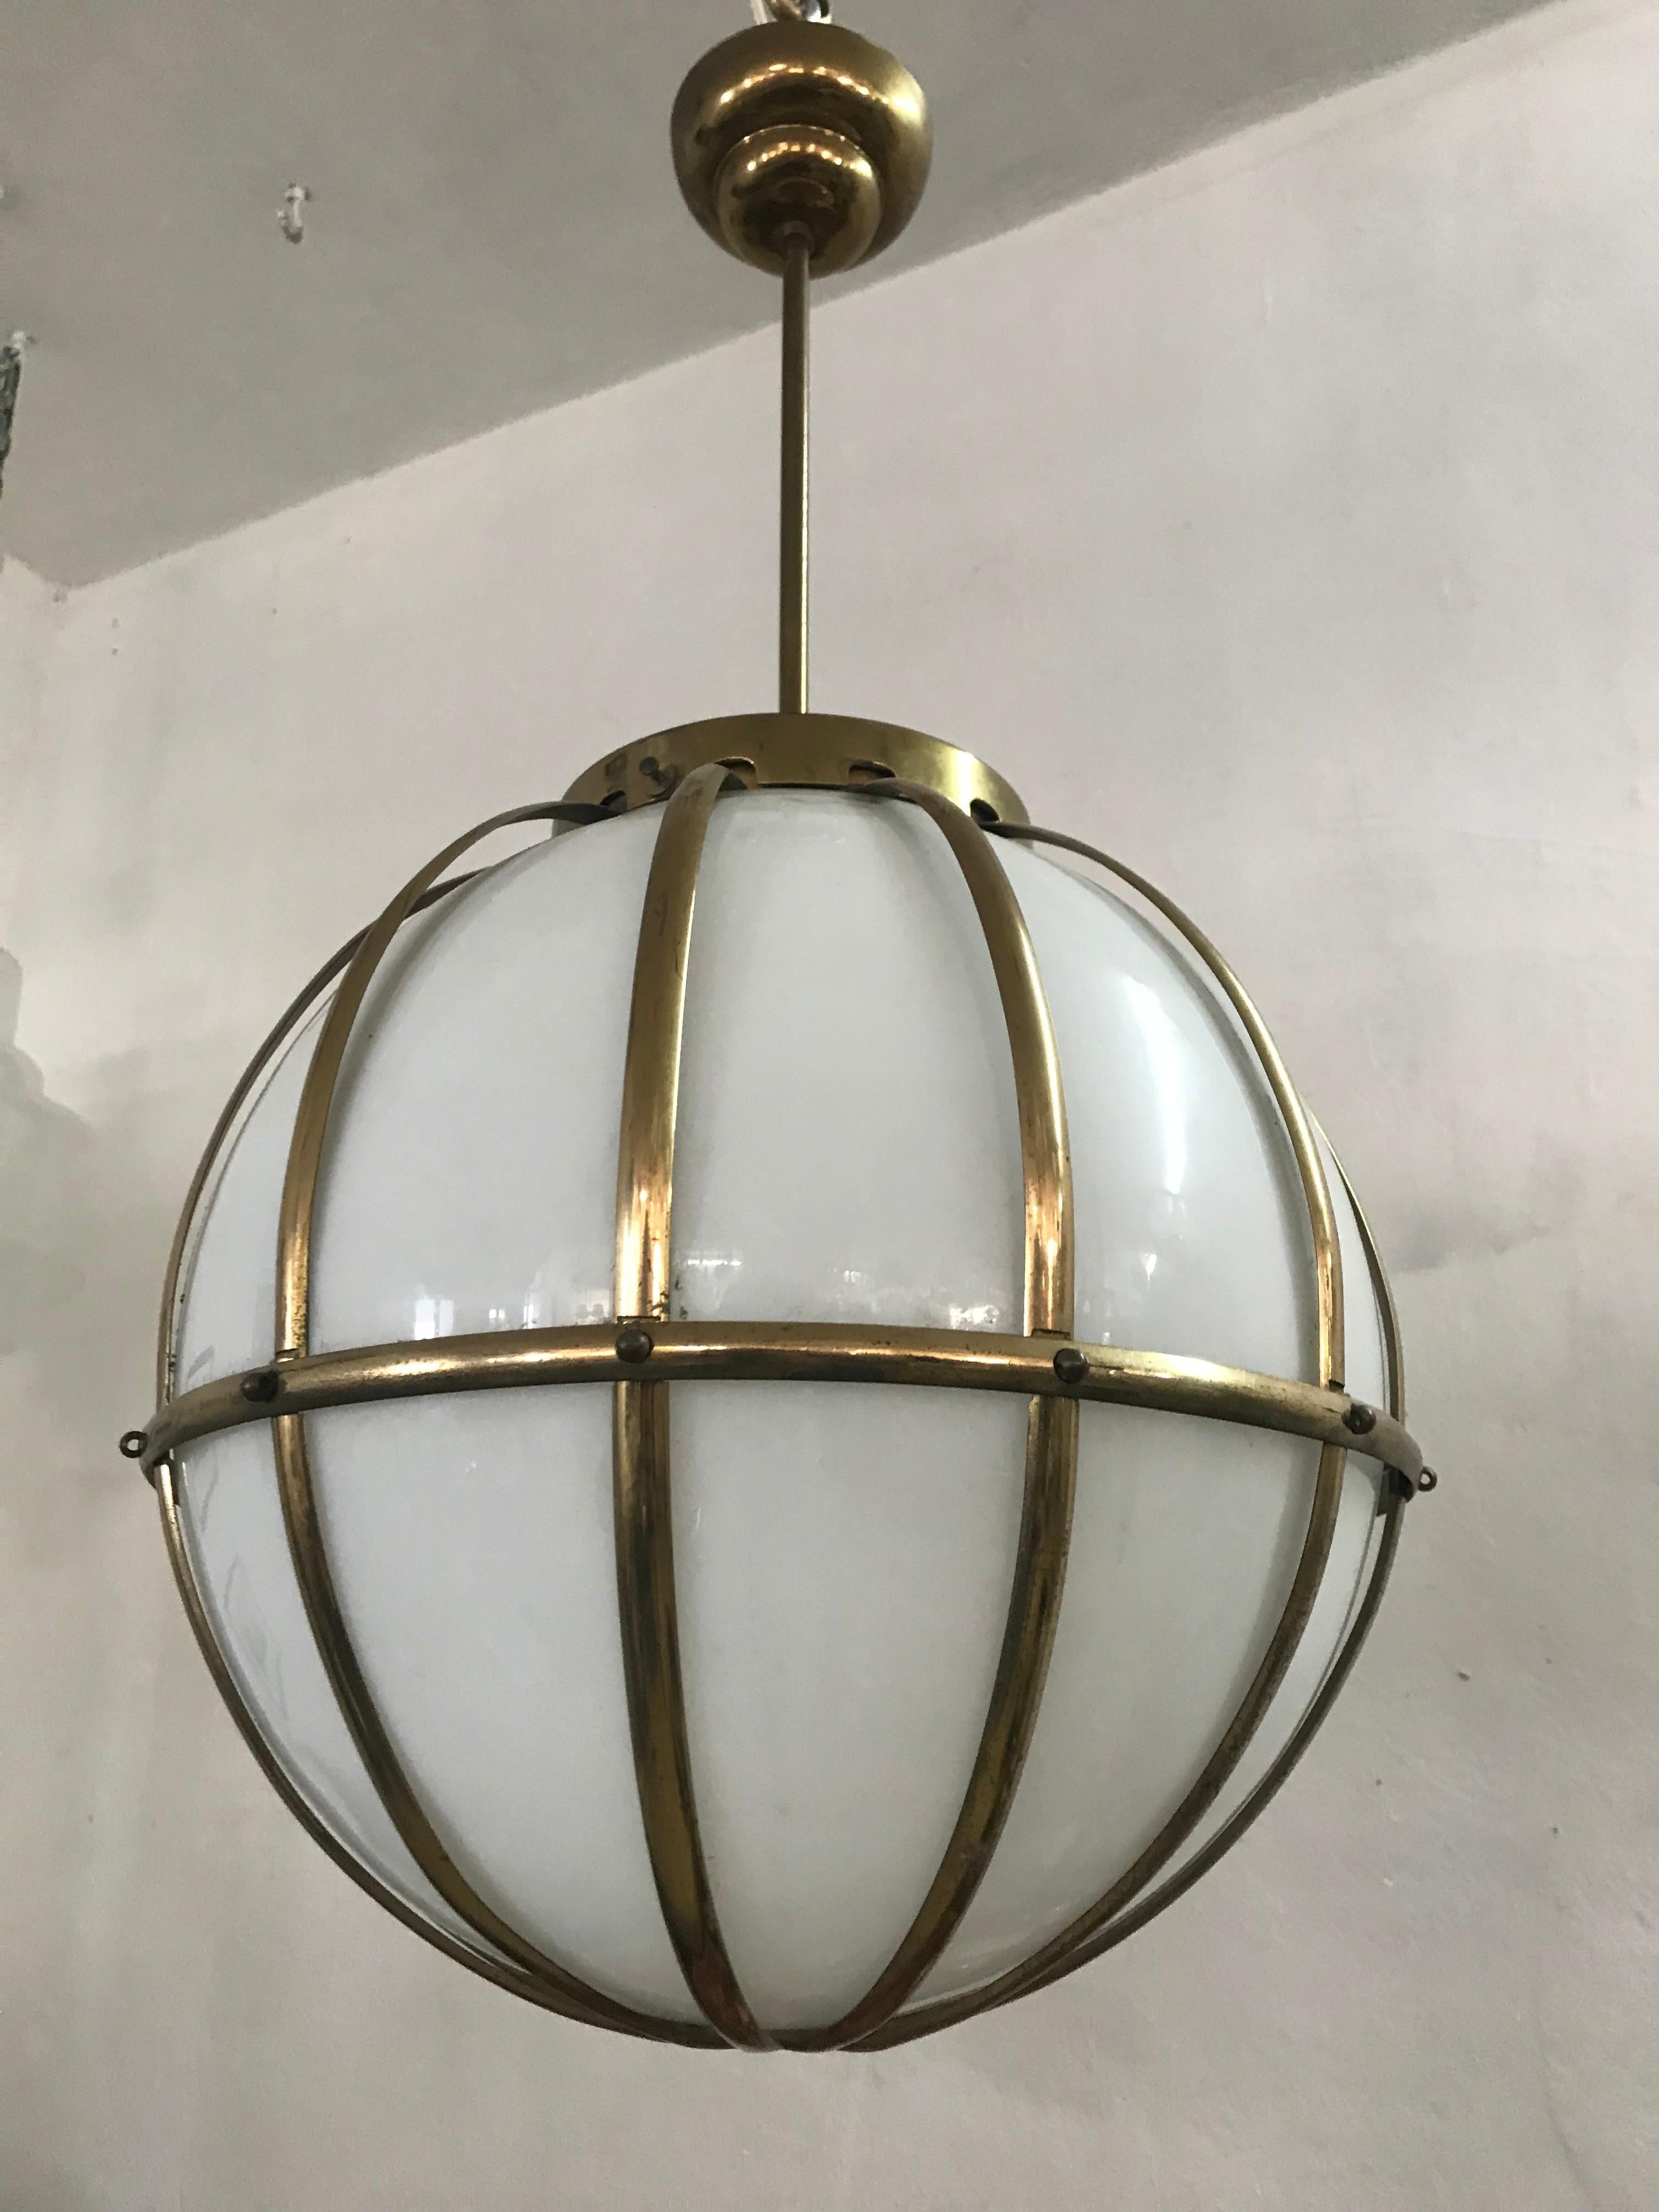 MId-Century Modern Italian pendant light in brass and opaline glass, circa 1950
In the style of Arredoluce and Gio Ponti.